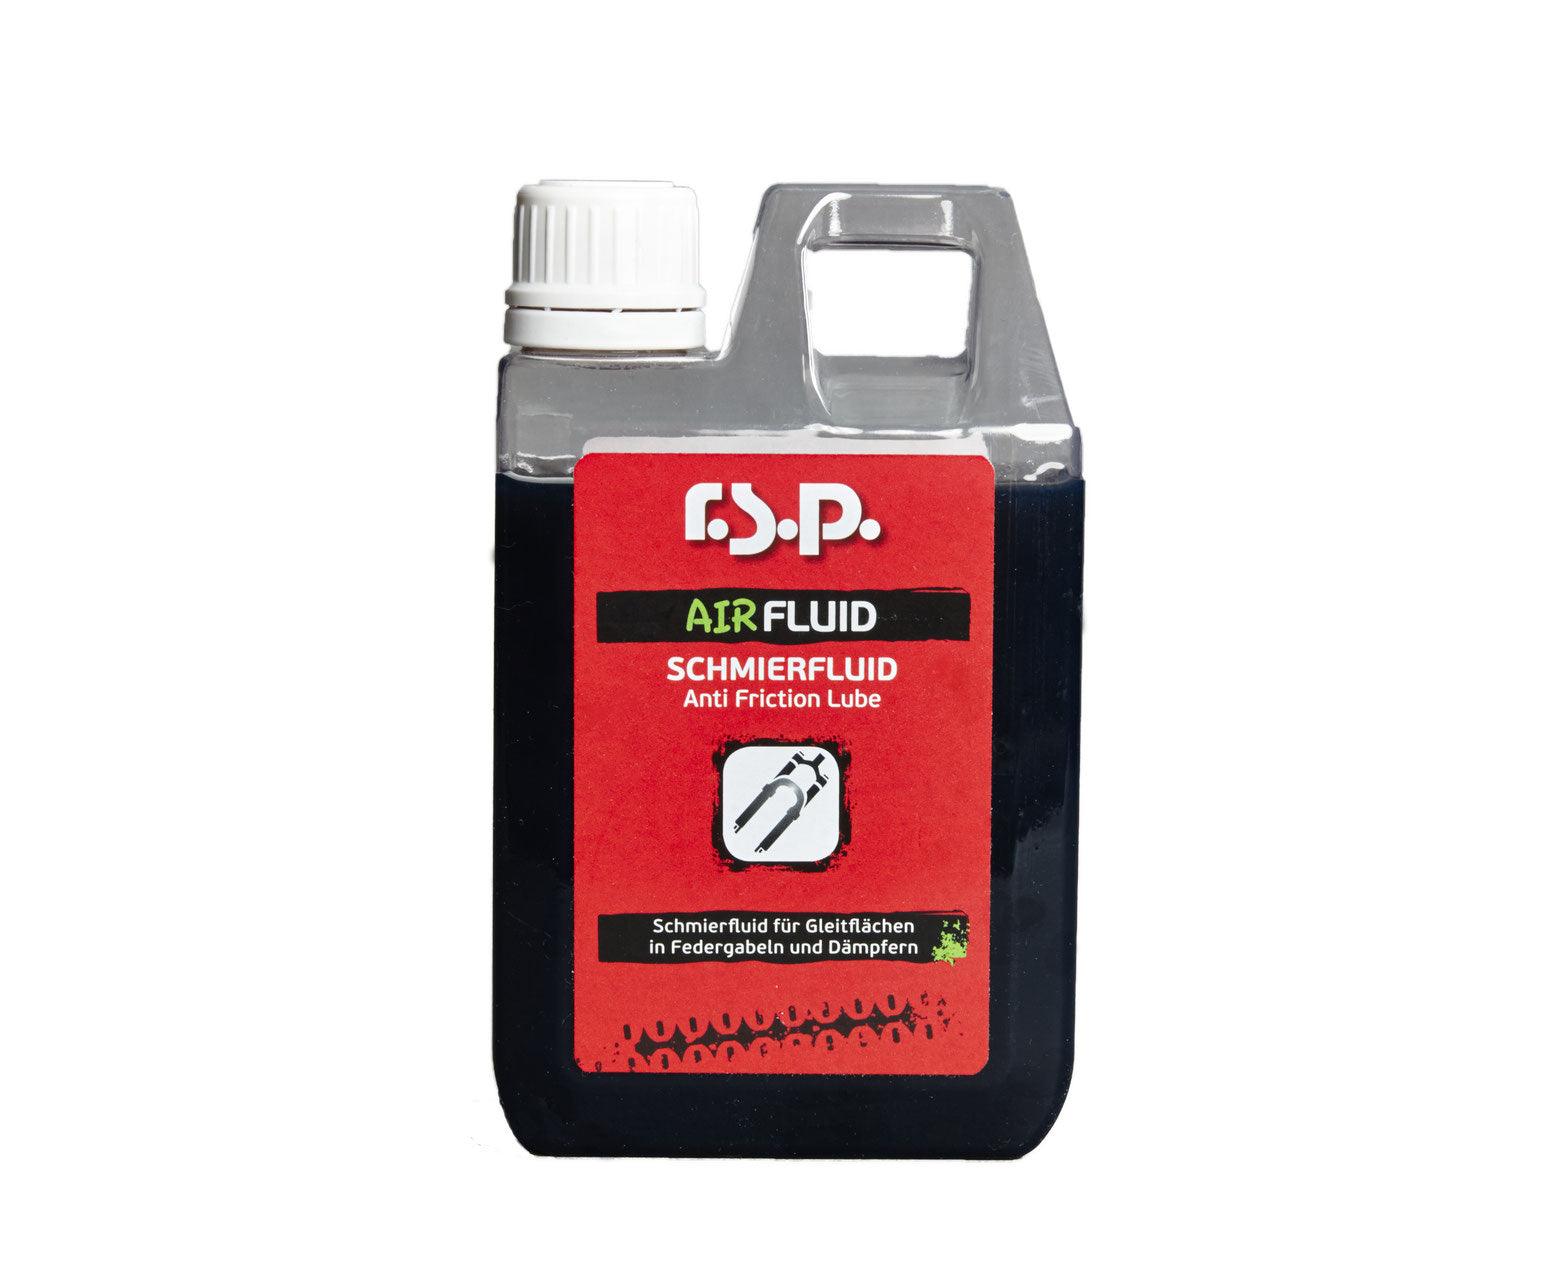 RSP Air Fluid (anti friction lubricant) - GAMUX